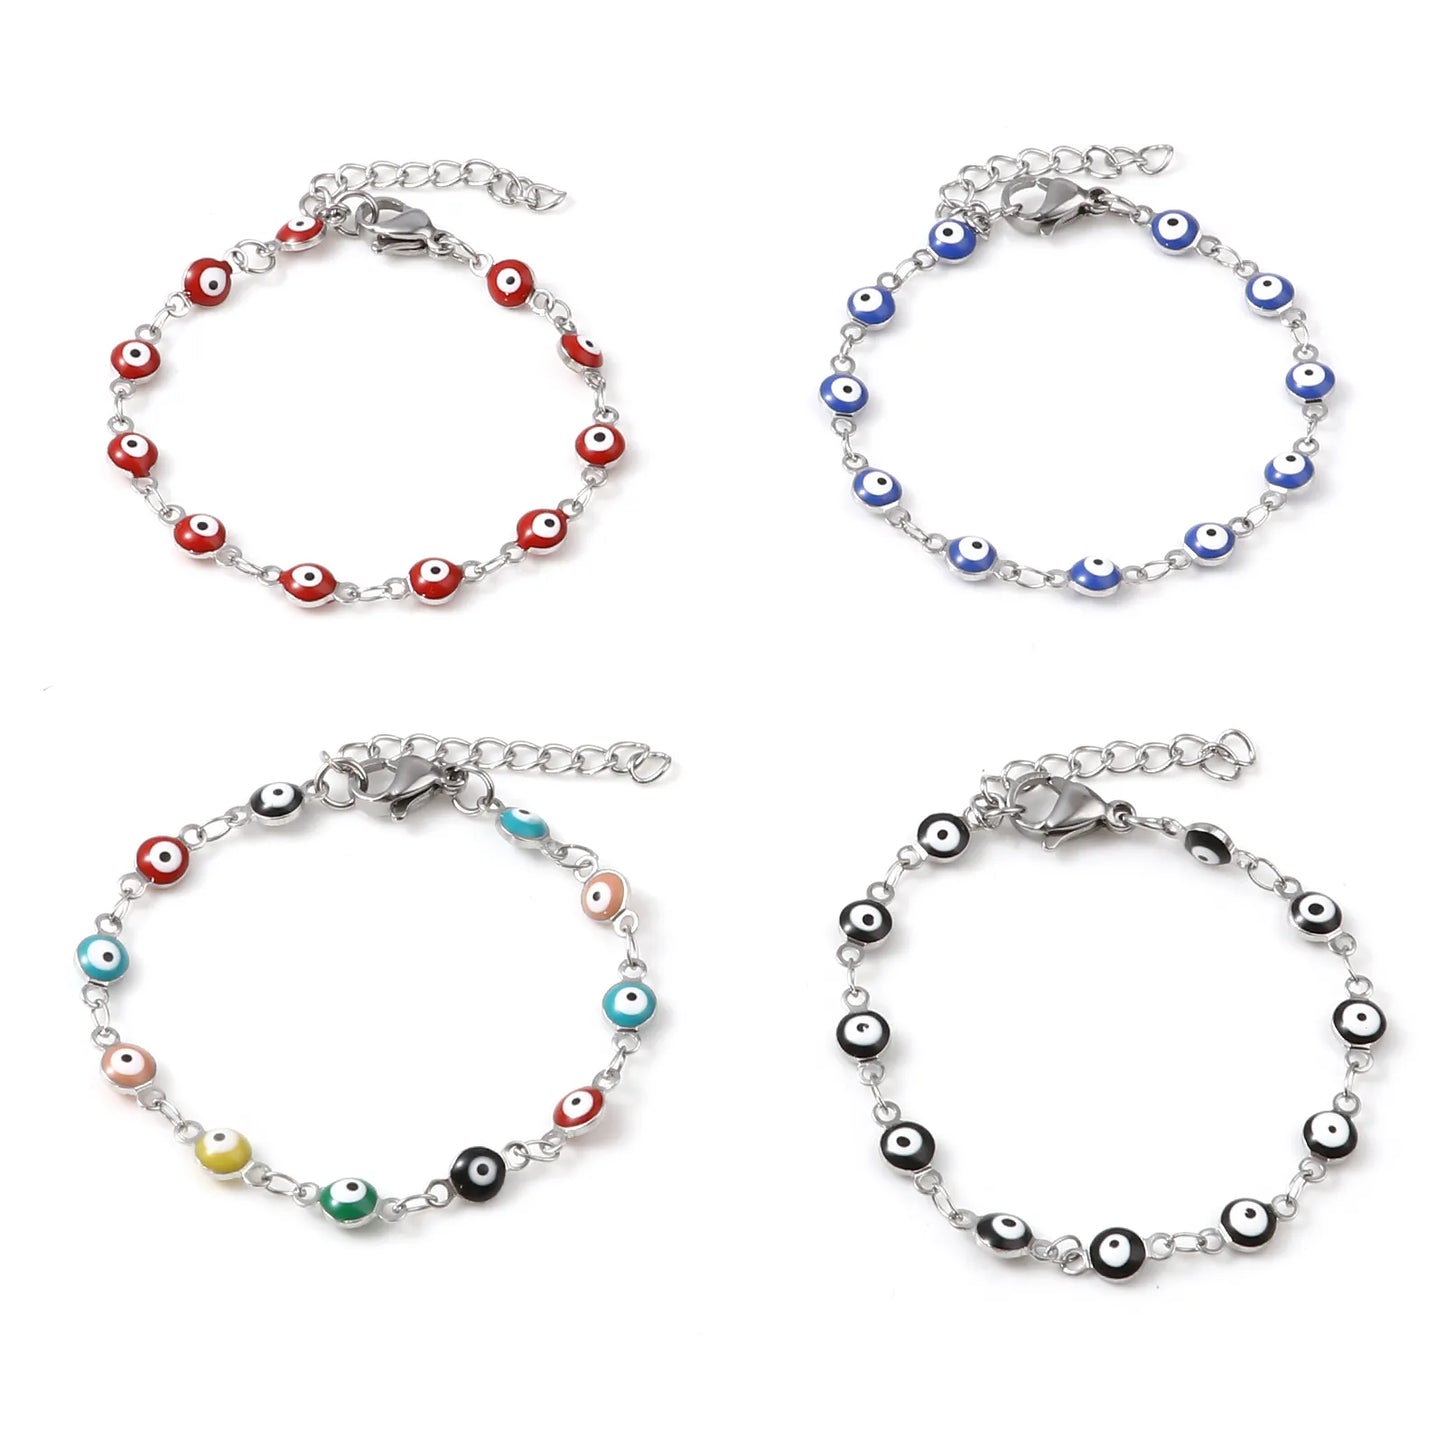 Stainless Steel Religious Bracelets Silver Color Link Chain Multicolor Round Evil Eye Enamel Jewelry 13.5cm(5 3/8") long, 1Piece